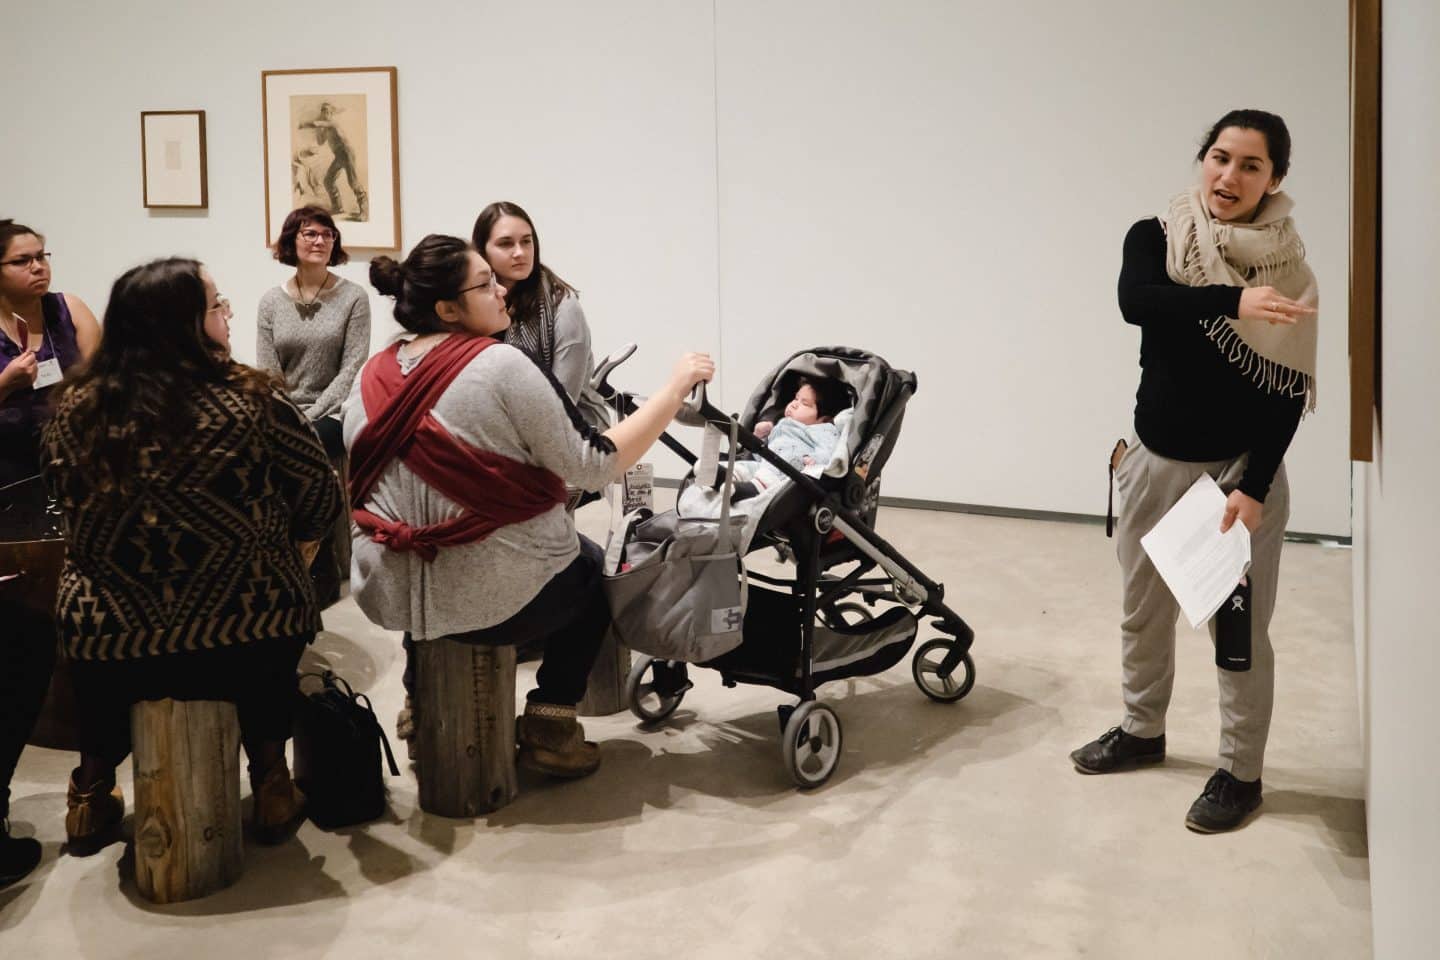 Young mothers, serving as Mama-We mentors in their communities, spent two days at Agnes Etherington Art Centre touring the exhibition Soundings: An Exhibition in Five Parts, learning about works in the collection and gaining skills in two Studio workshops.